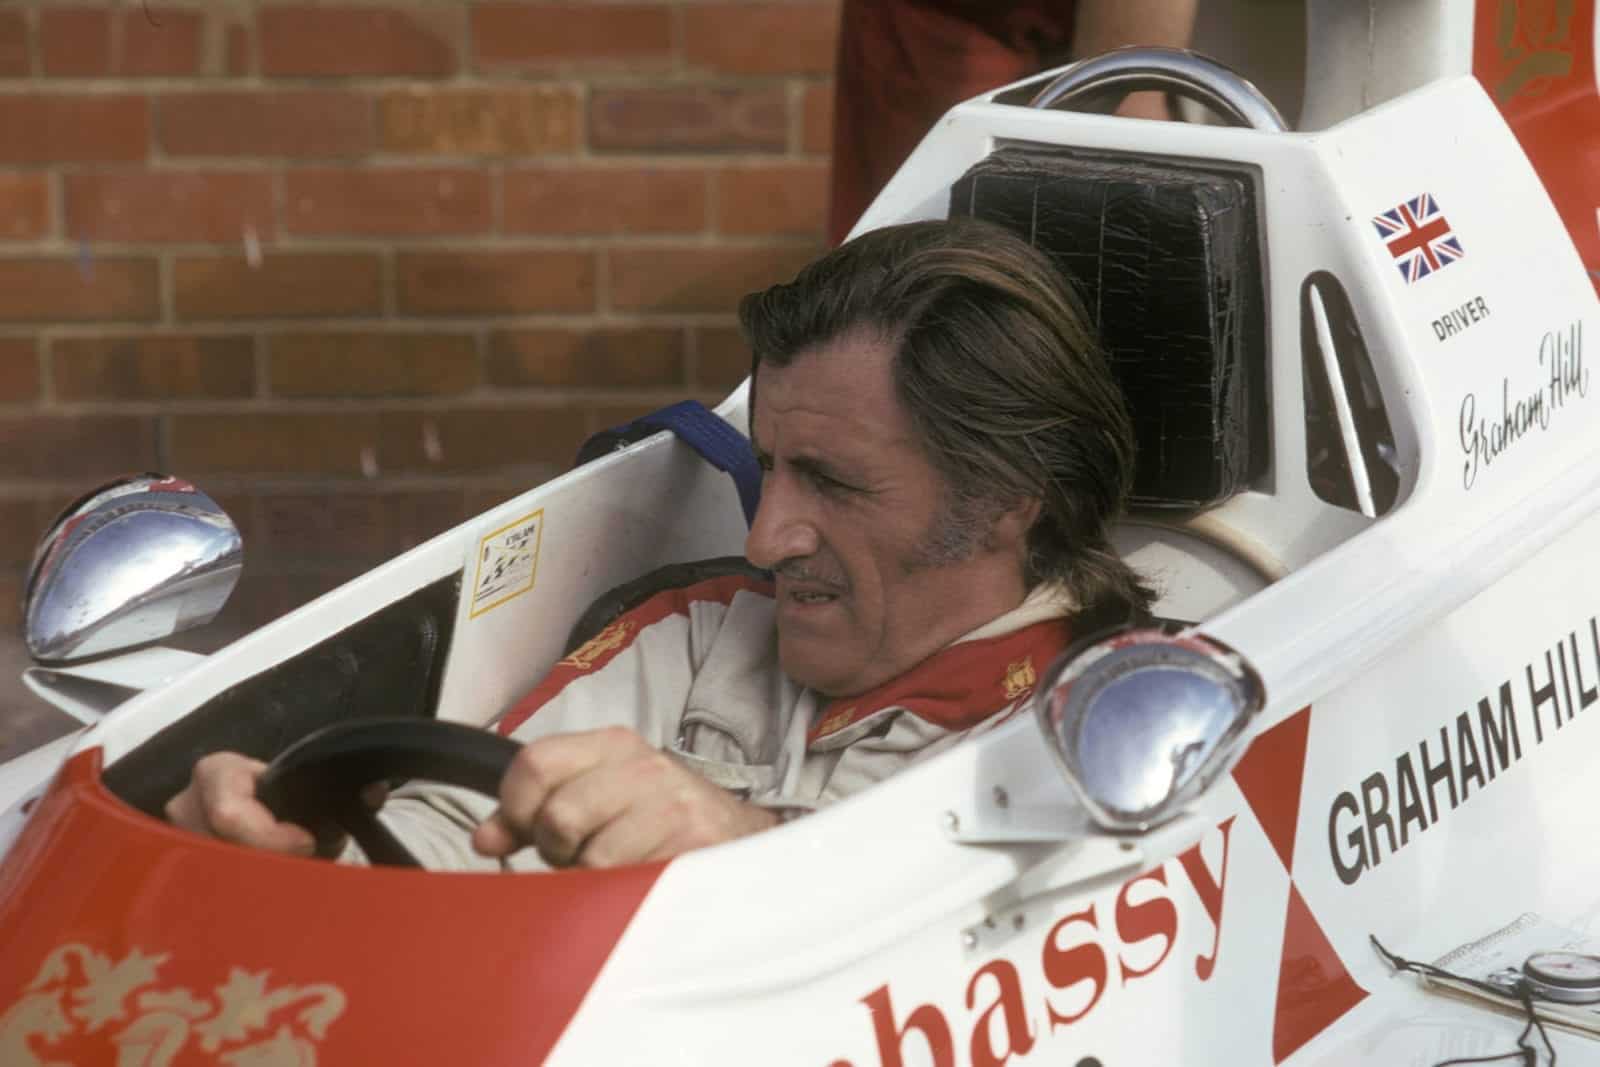 Graham Hill in his Lola Hill-Ford in the pits during practice for the 1974 South African Grand Prix in Kyalami. Photo: Grand Prix Photo